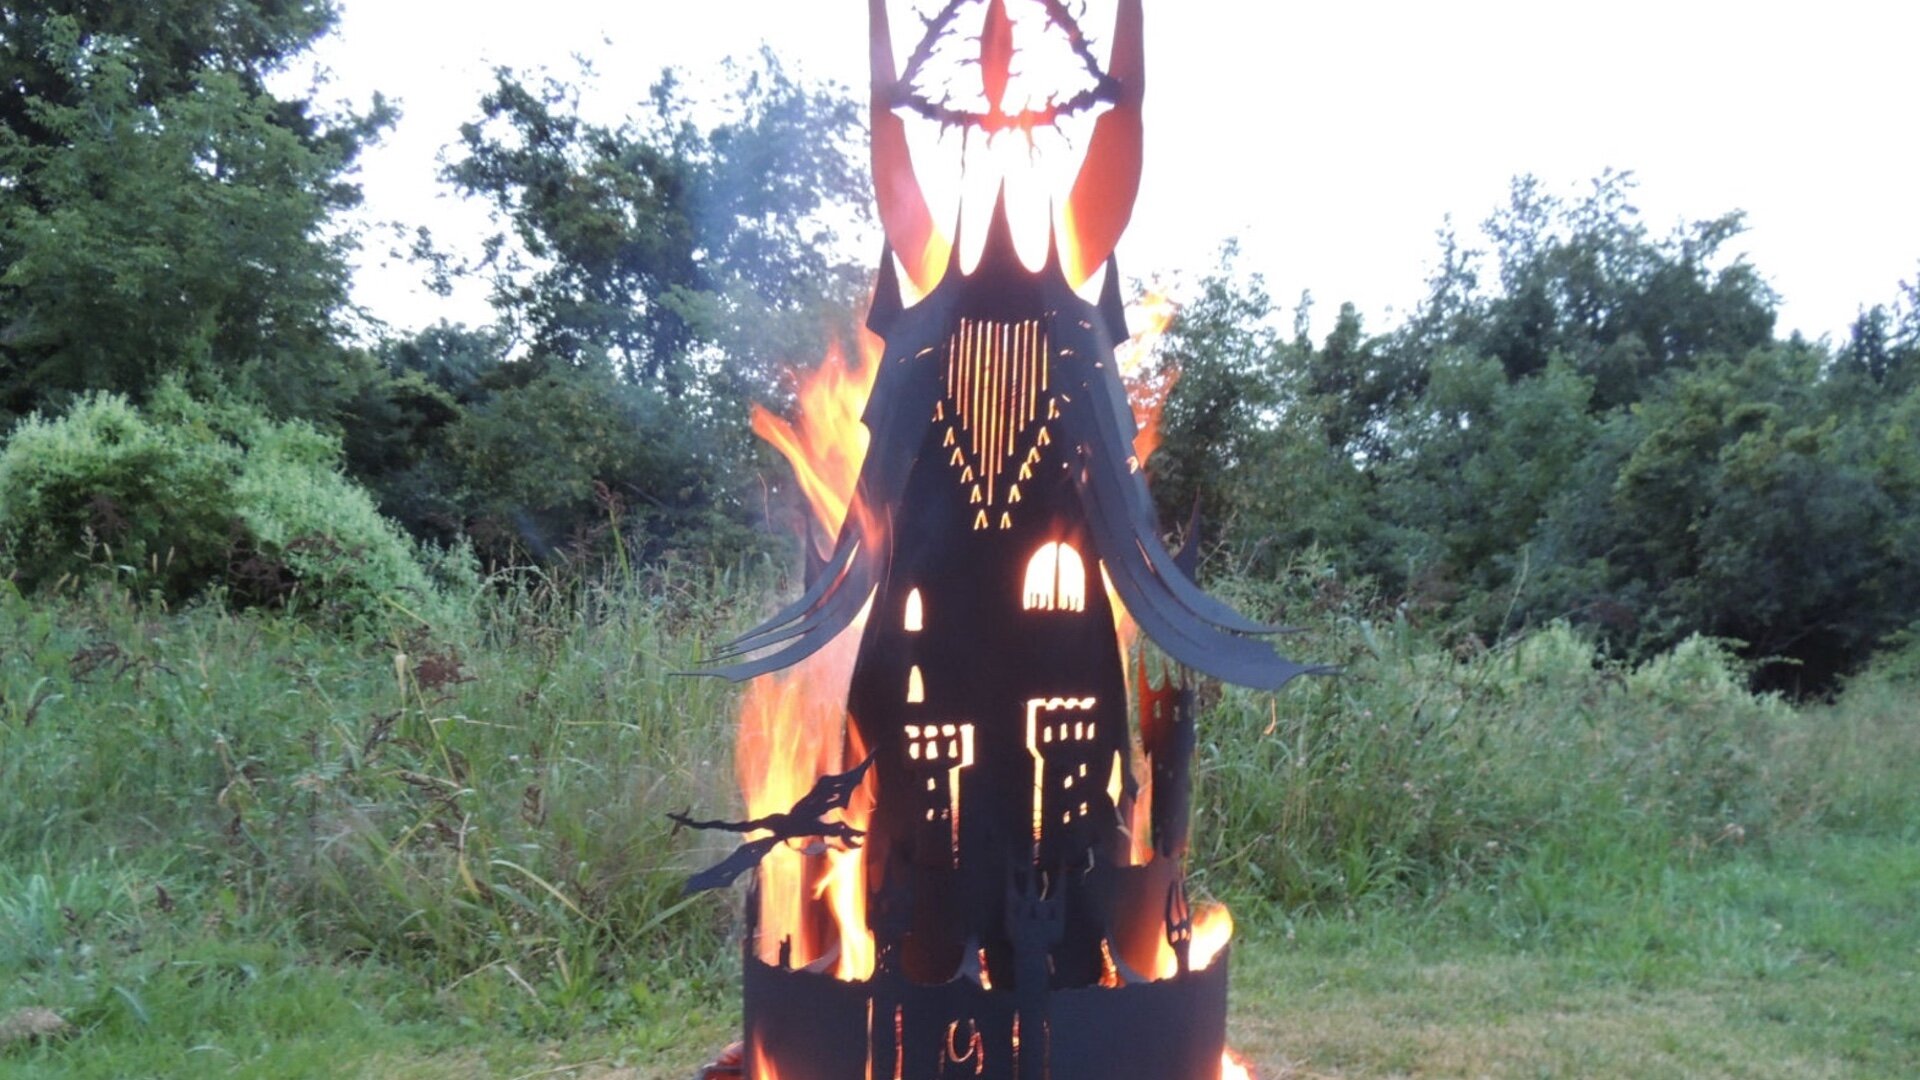 Rings Inspired Eye Of Sauron Fire Pit, Lotr Fire Pit